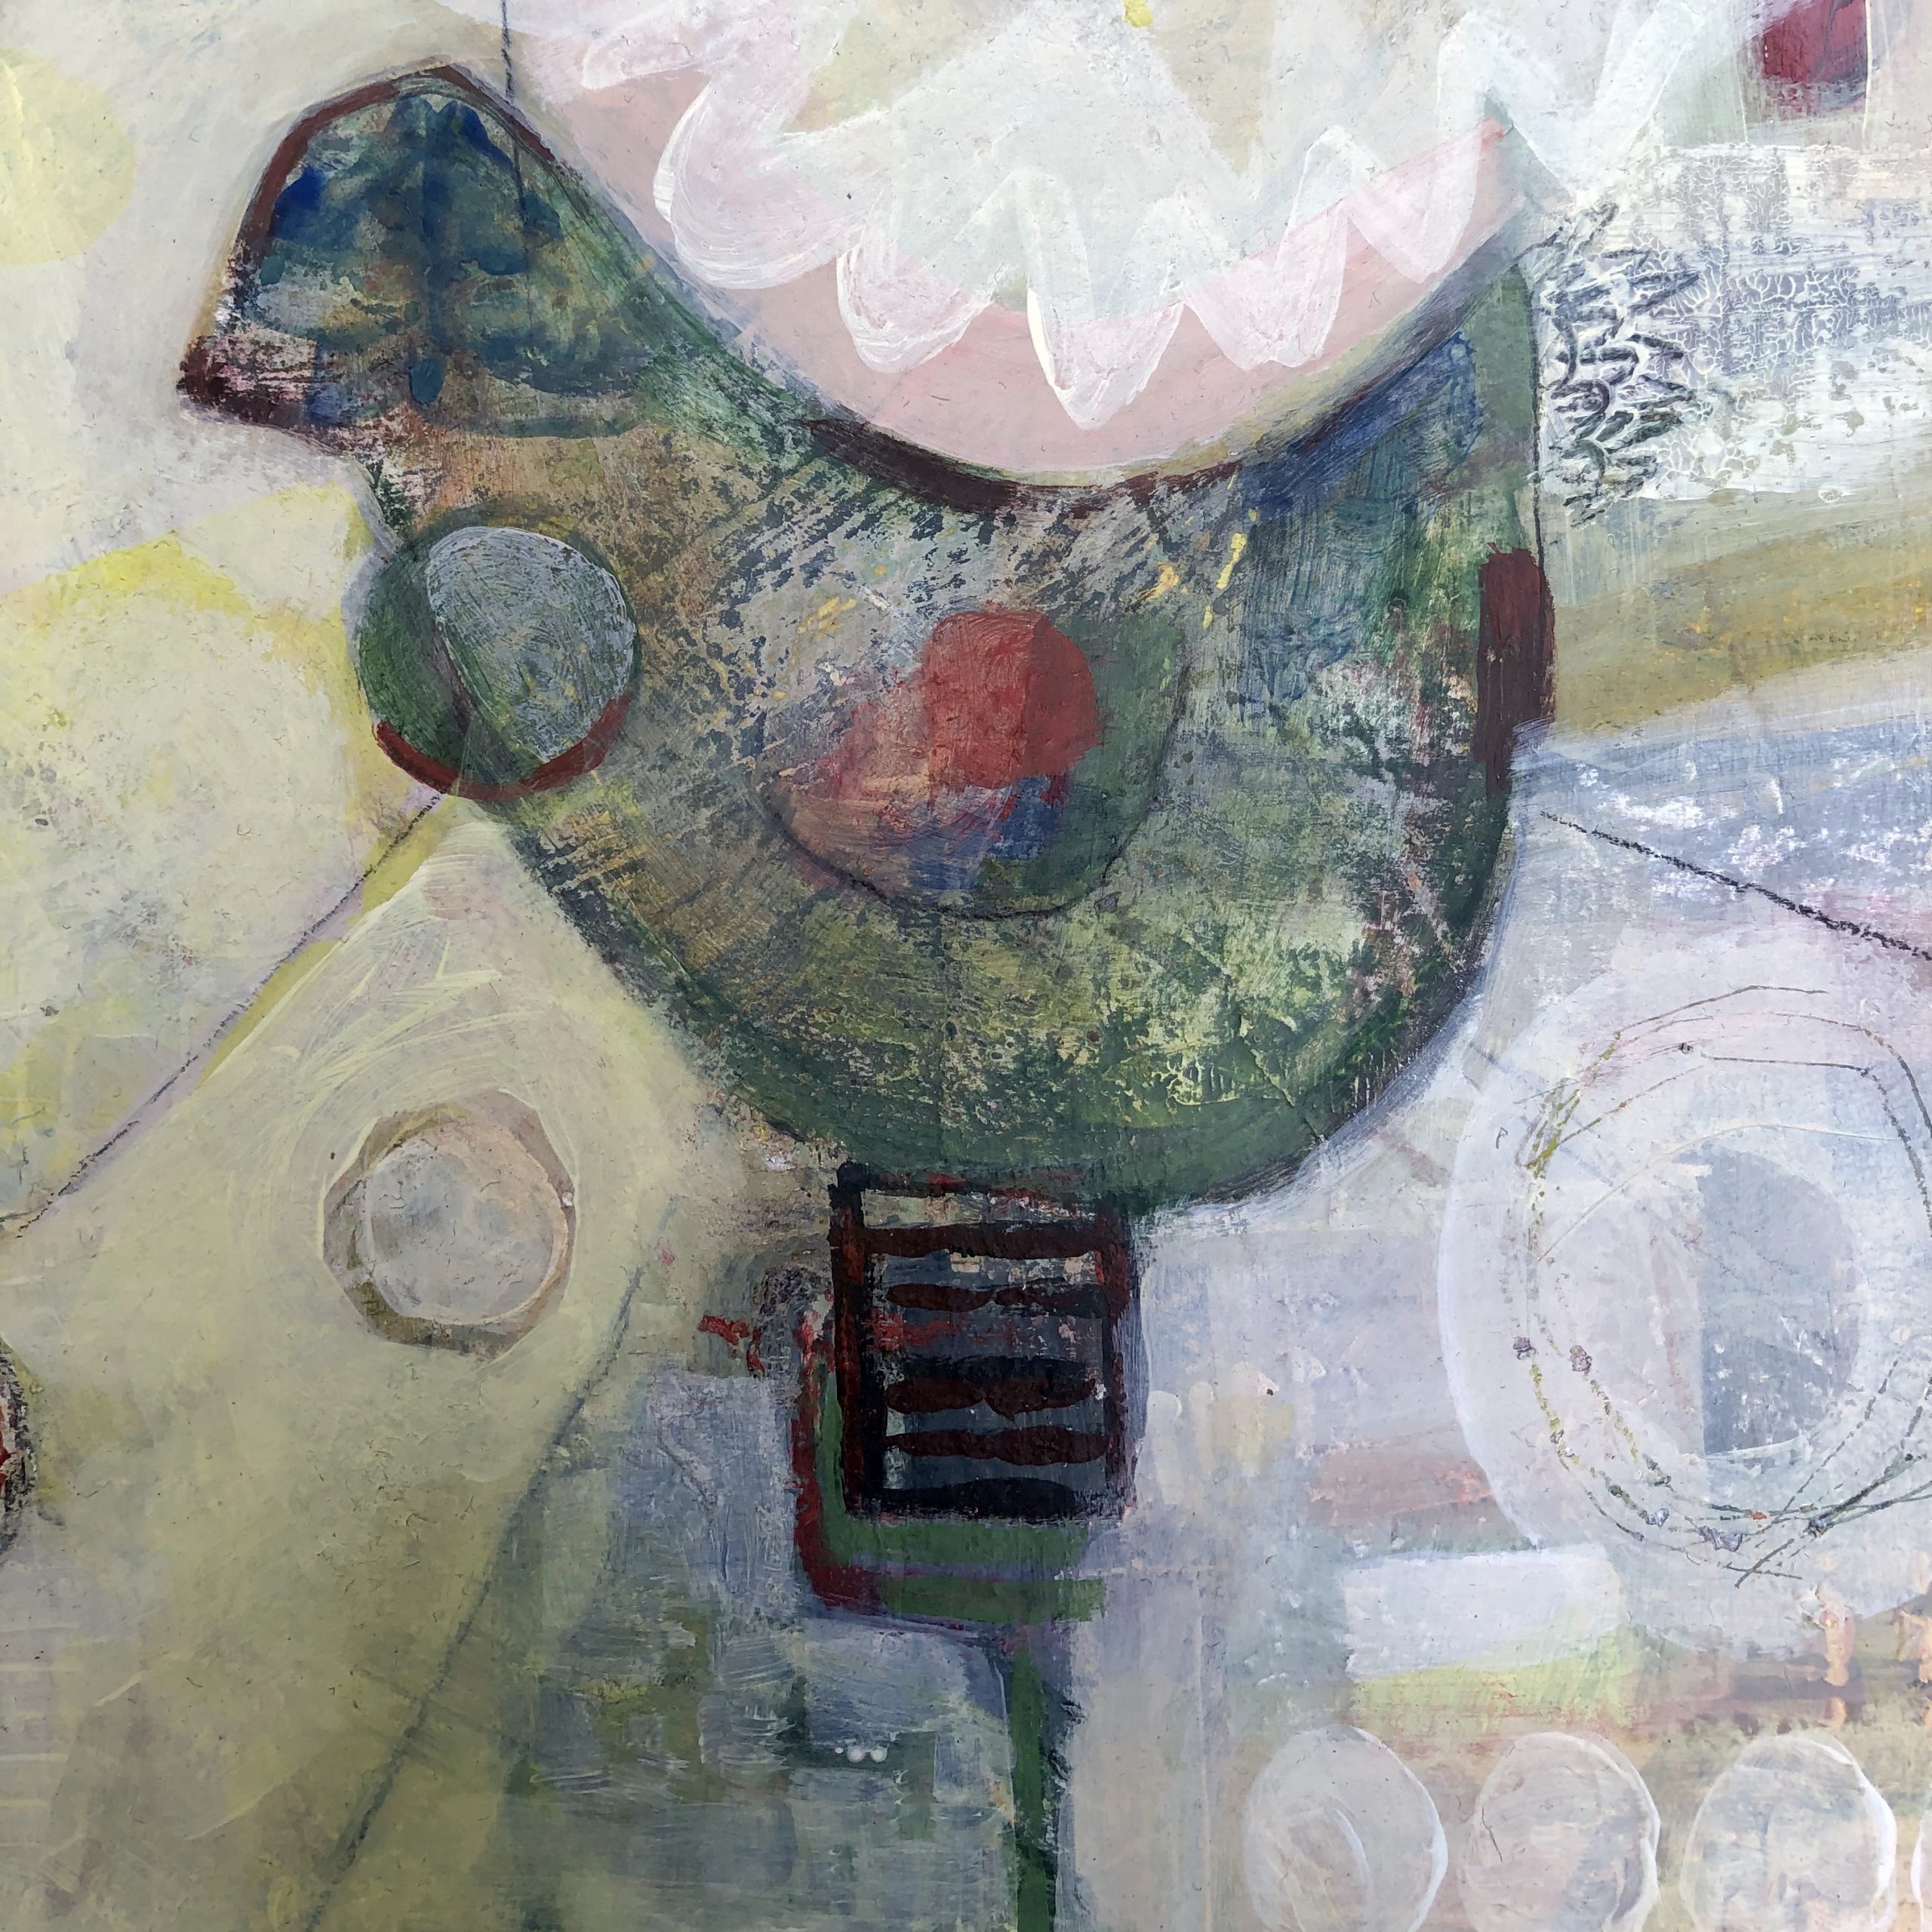 The Place Where Birds Used to Sing - Mixed Media on Board - 30 x 30 cm  - £240 painting by Chrissie Richards